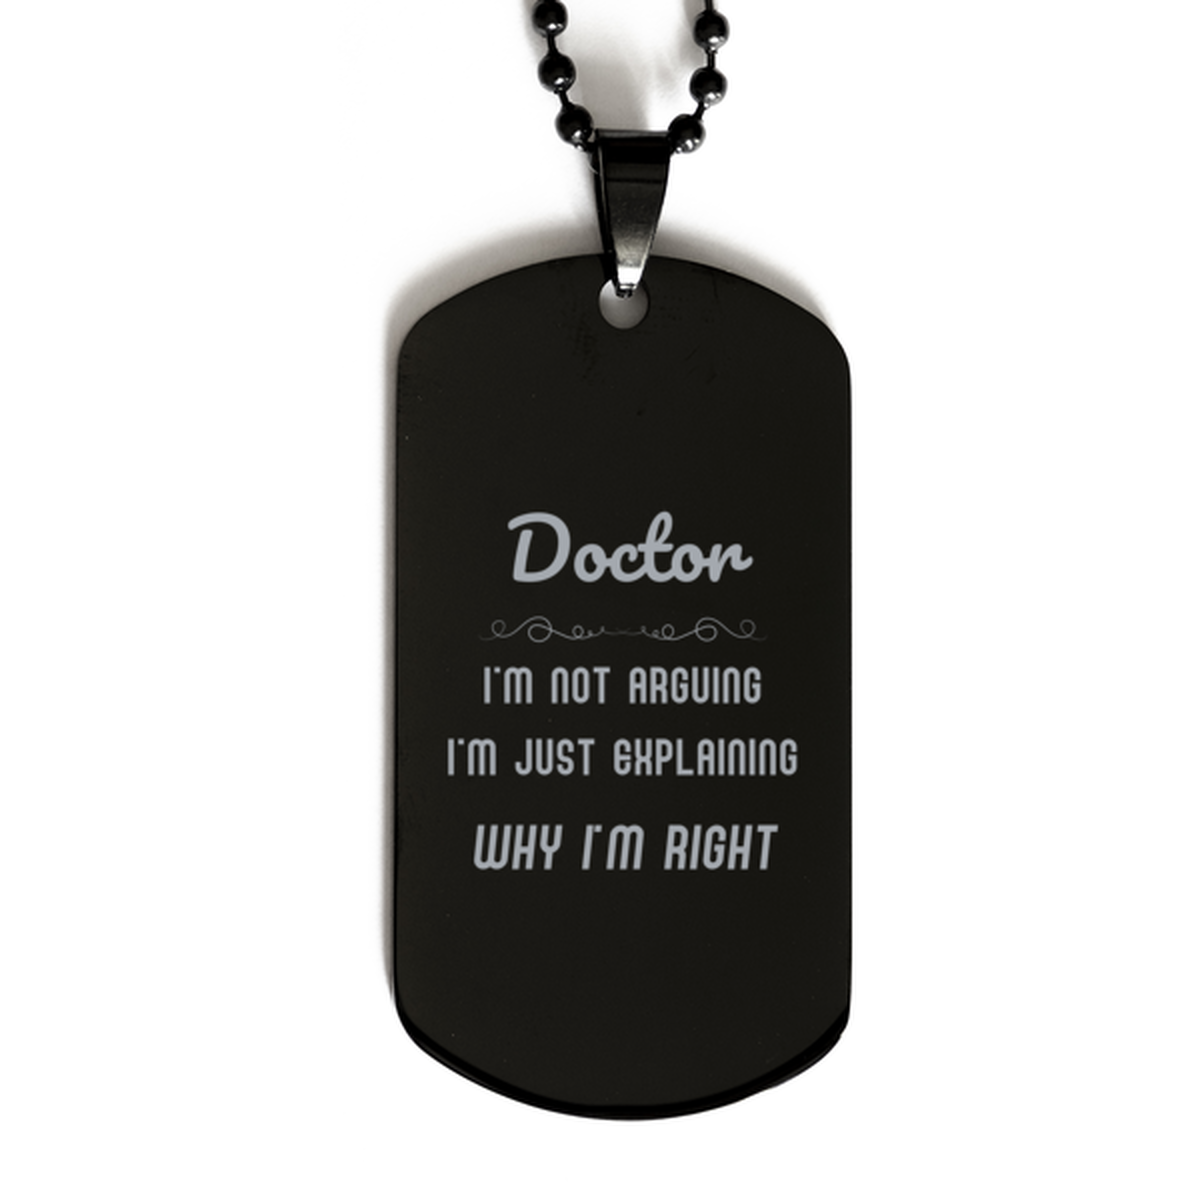 Doctor I'm not Arguing. I'm Just Explaining Why I'm RIGHT Black Dog Tag, Funny Saying Quote Doctor Gifts For Doctor Graduation Birthday Christmas Gifts for Men Women Coworker